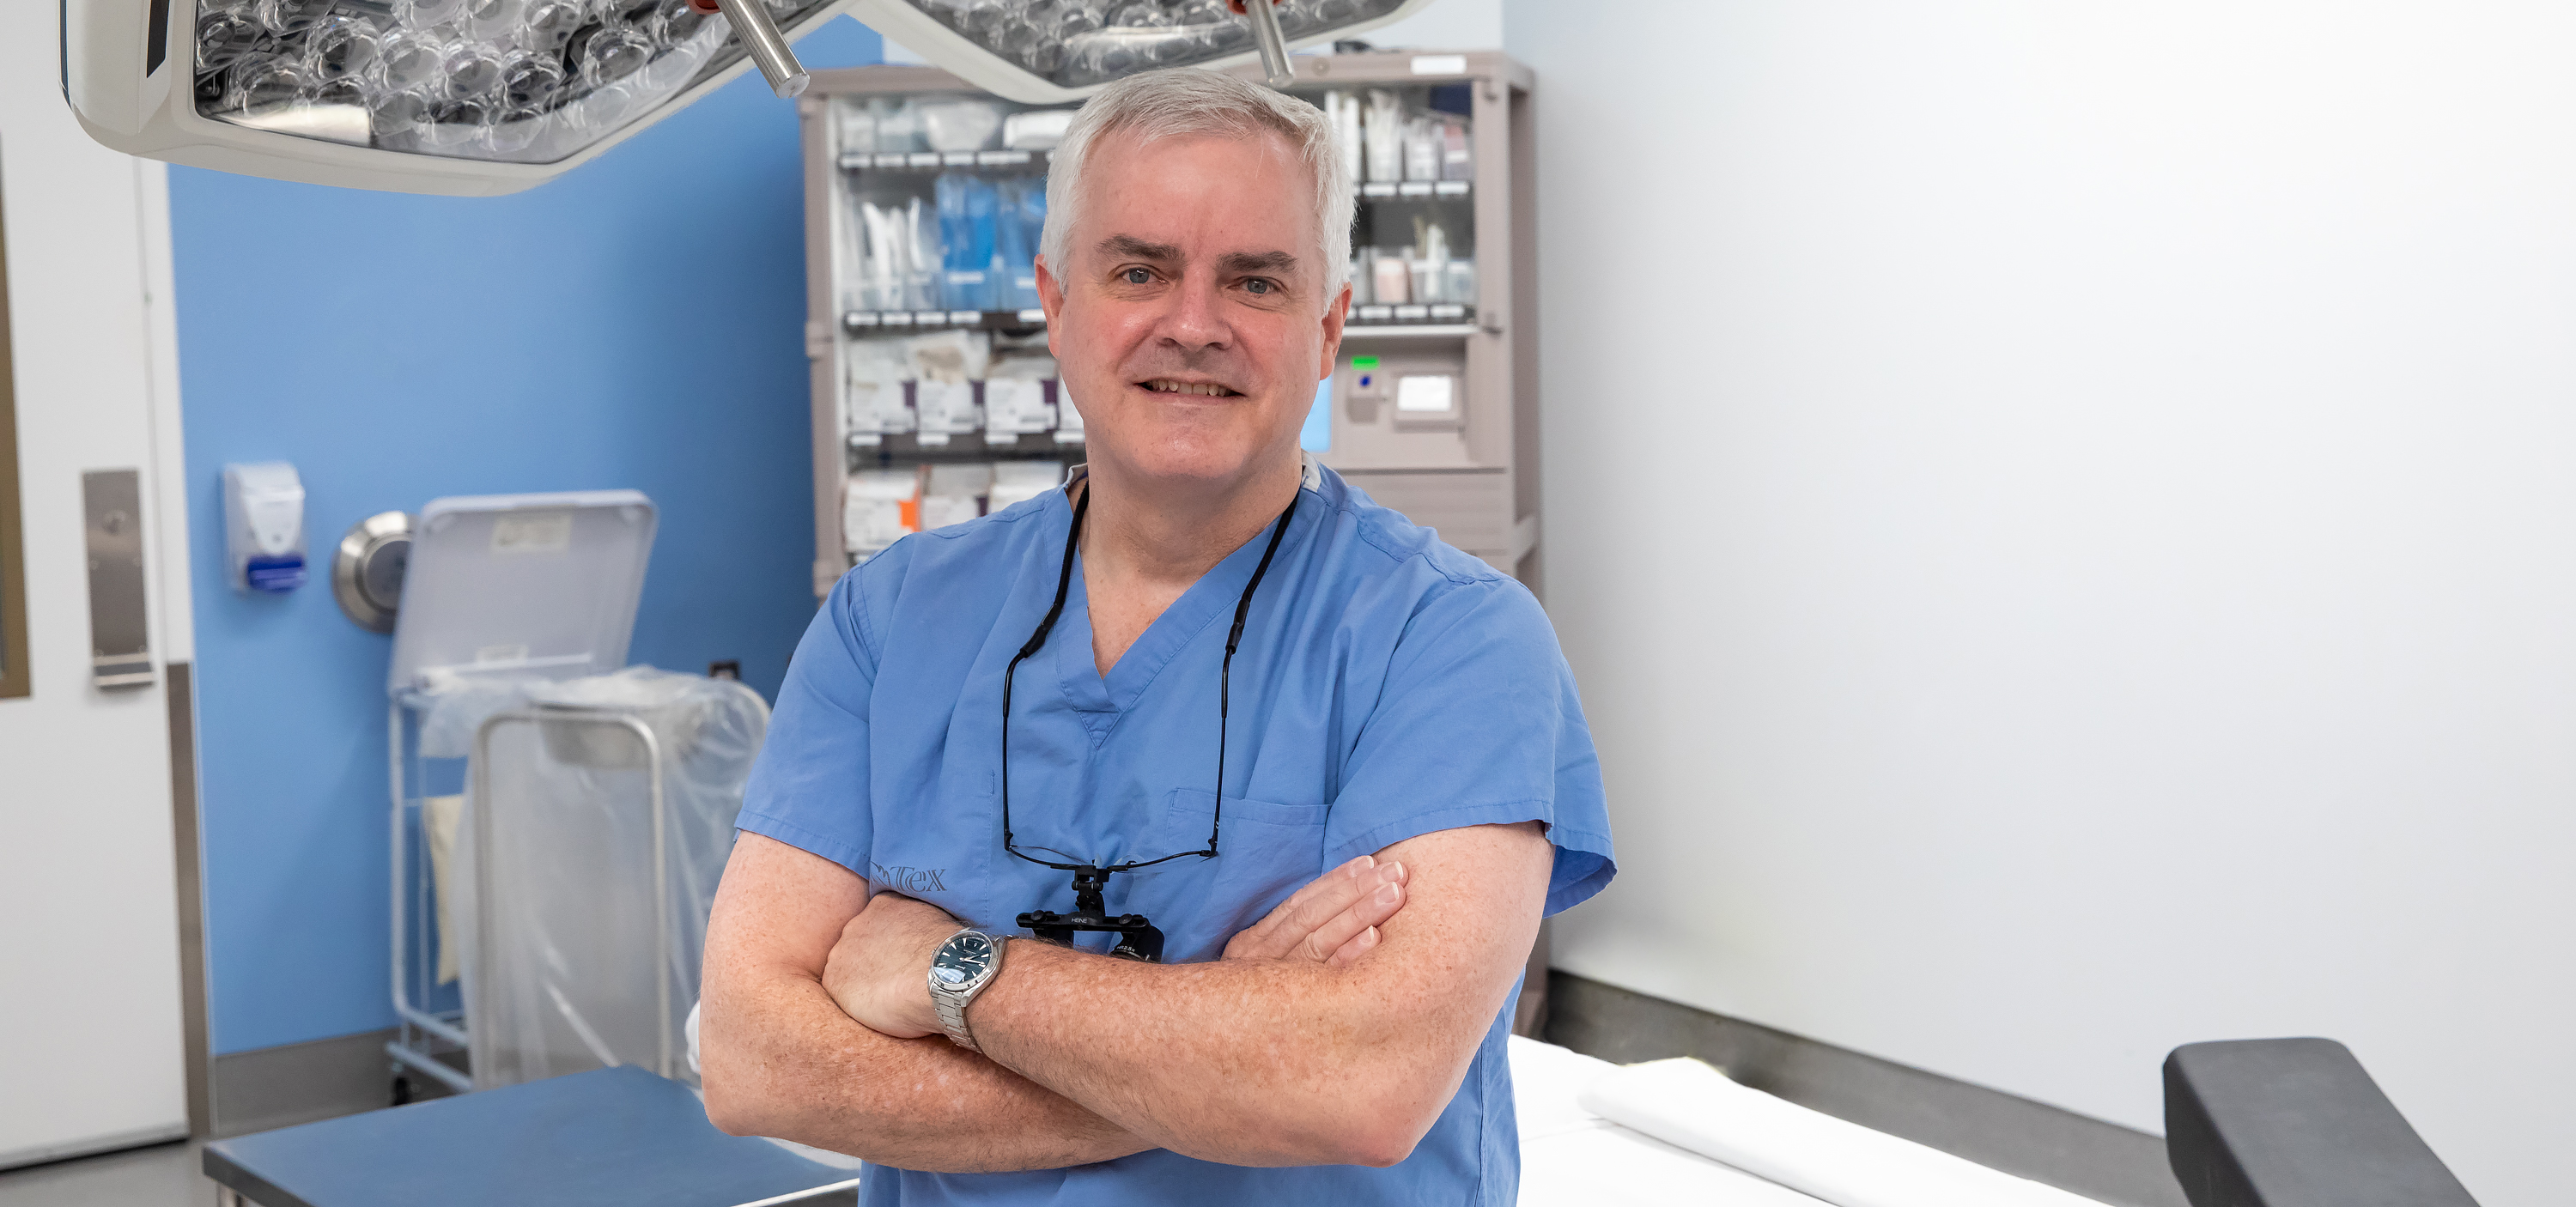 ‘It takes a village’: Q&A with Sinai Health’s Surgeon-in-Chief Dr. Ian Witterick